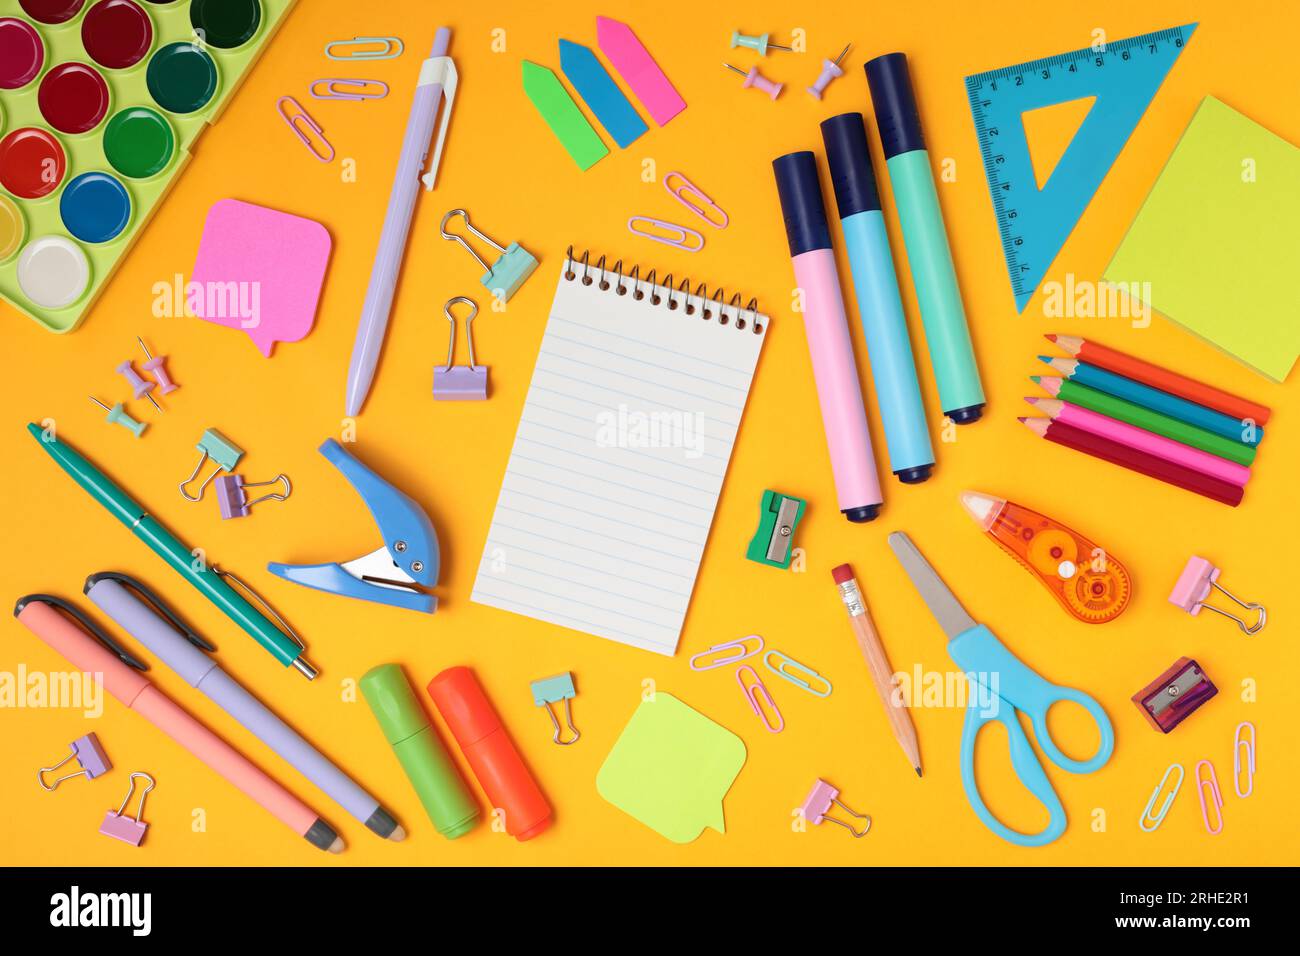 School and office supplies on yellow background, mock-up top view close-up Stock Photo